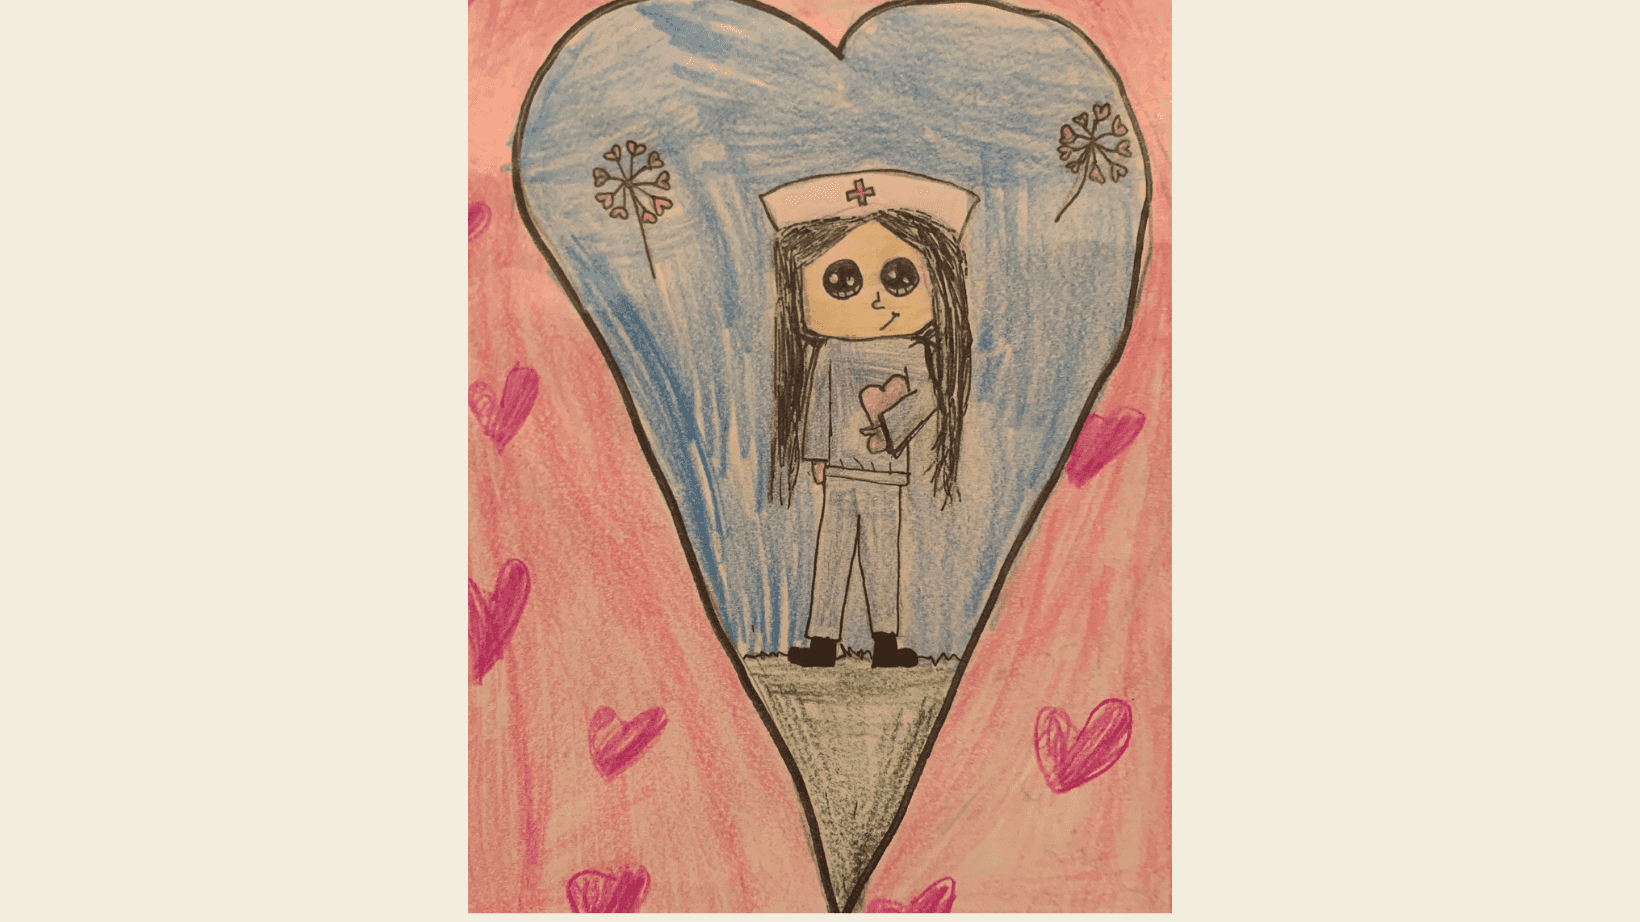 Vote for: Love for Nurses - By Elise, Age 7